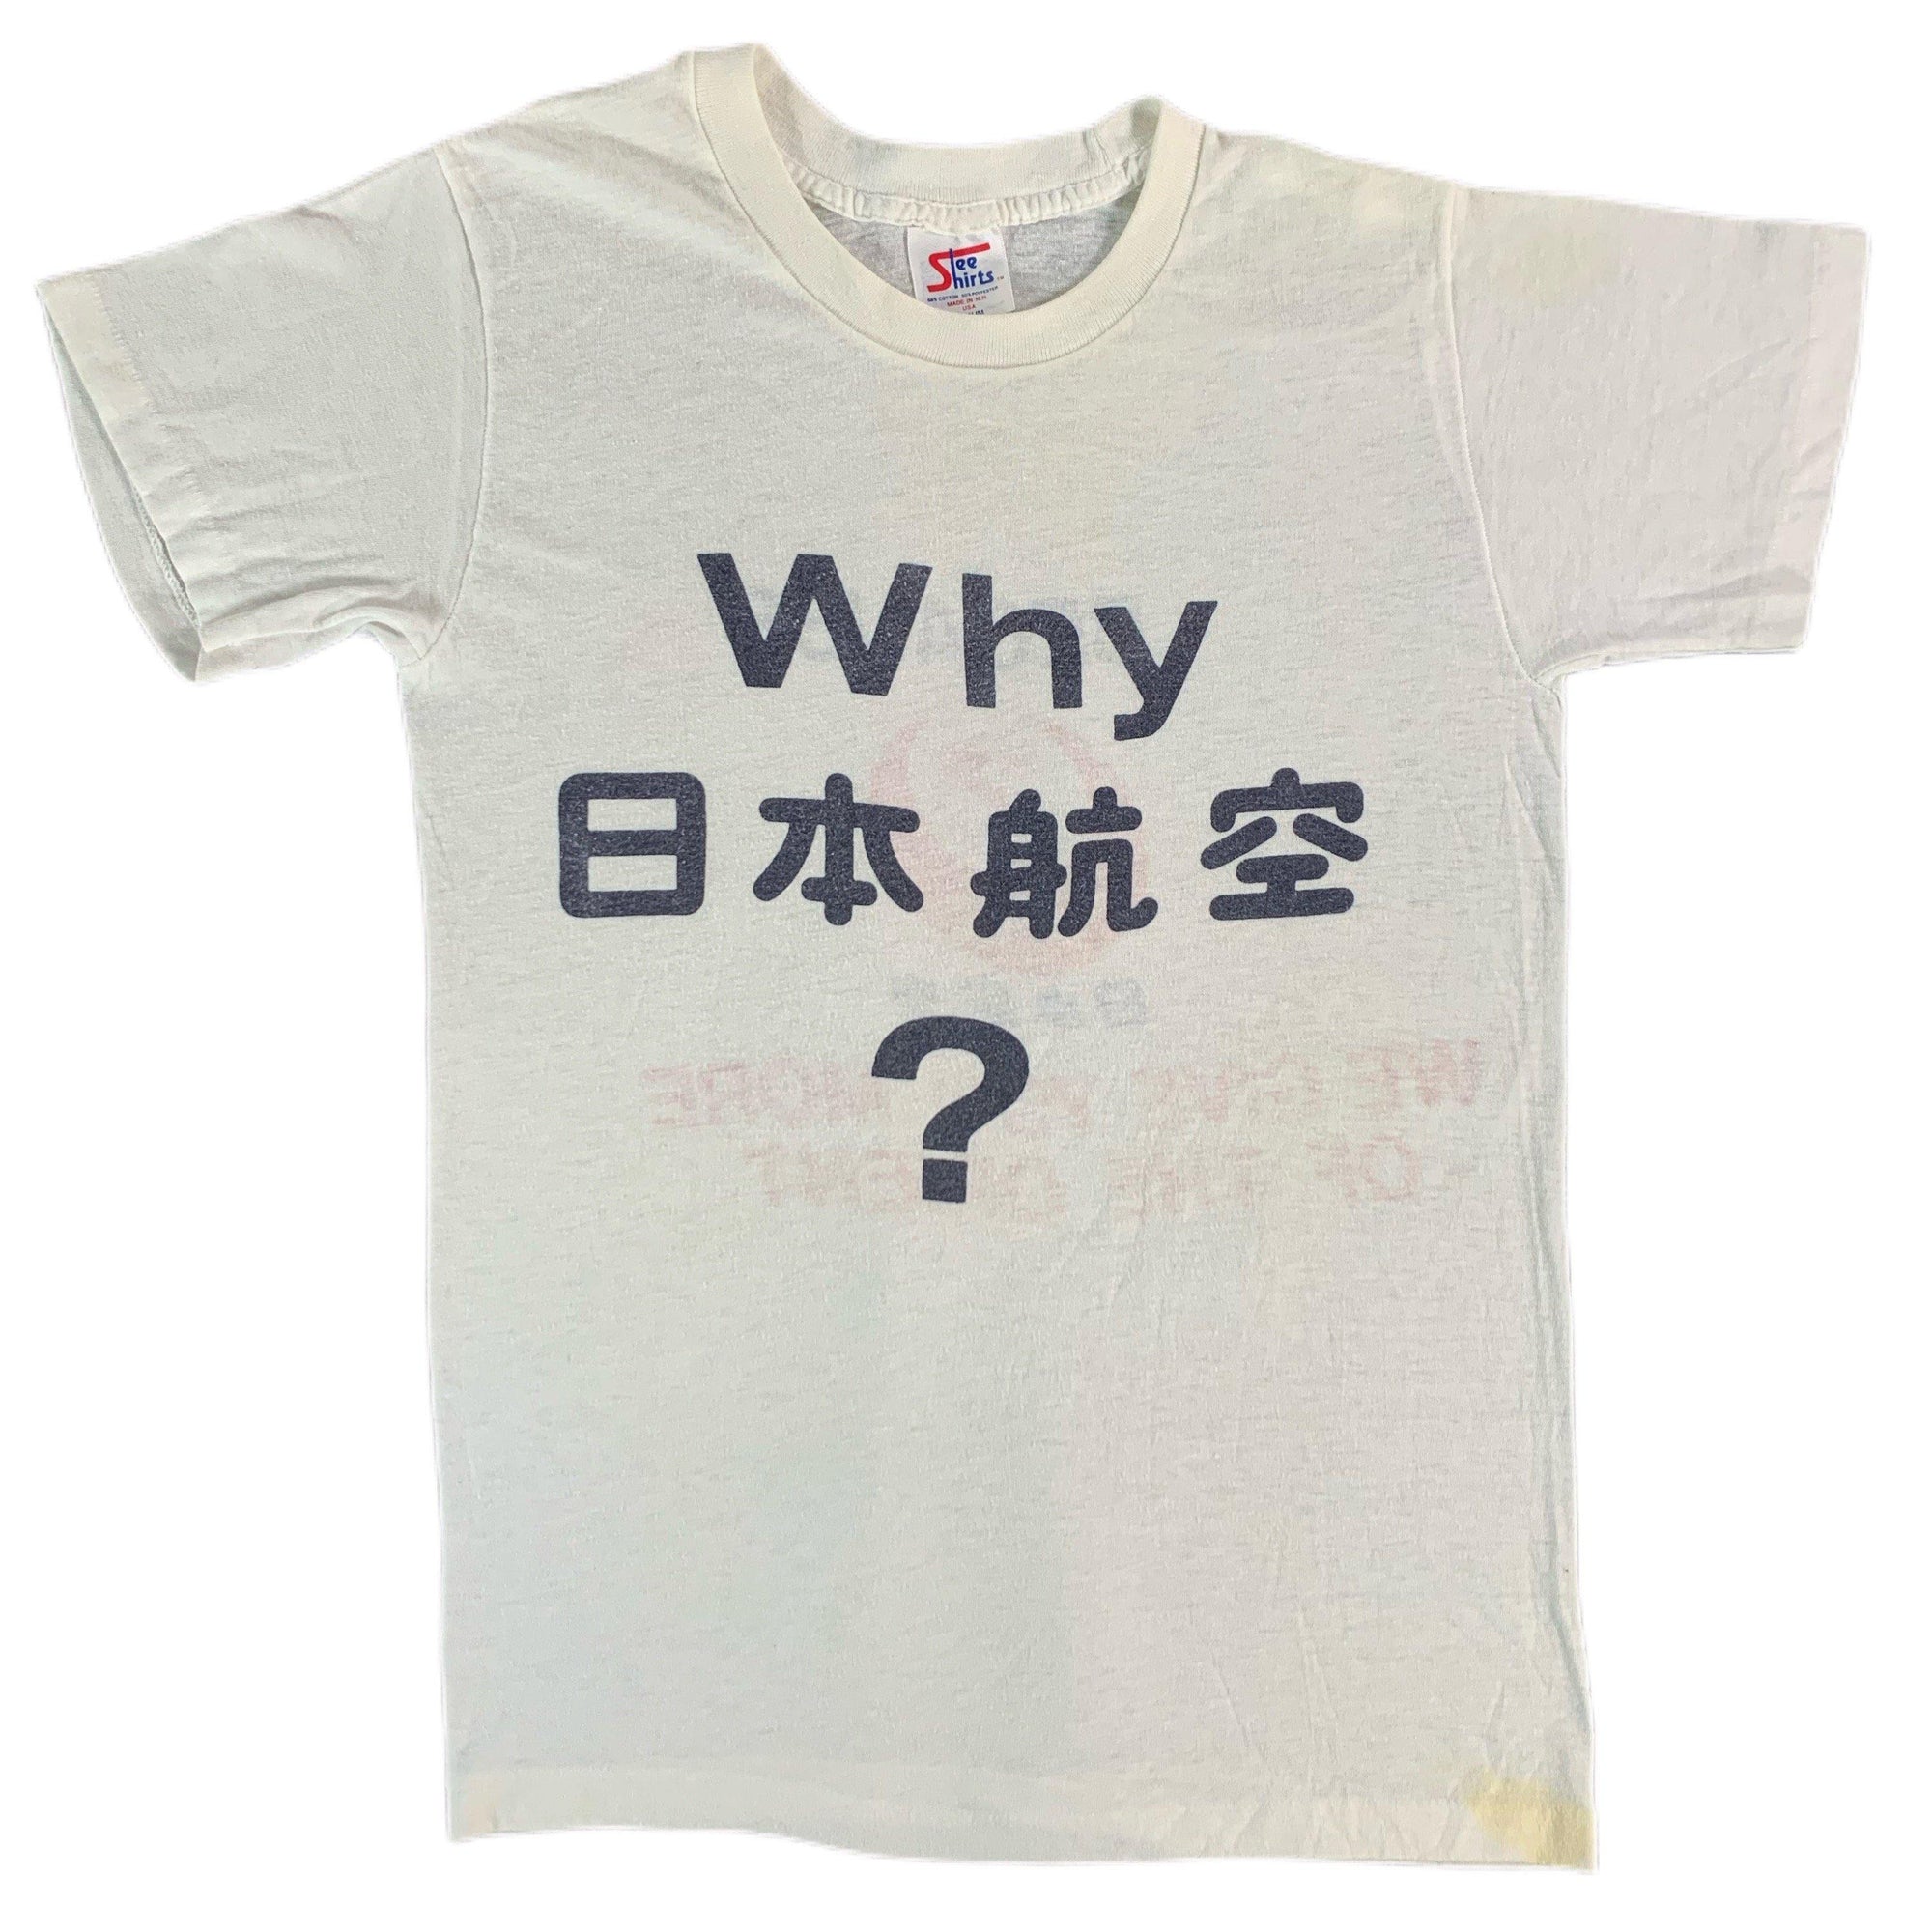 Vintage Japan Airlines "Why?" T-Shirt - jointcustodydc